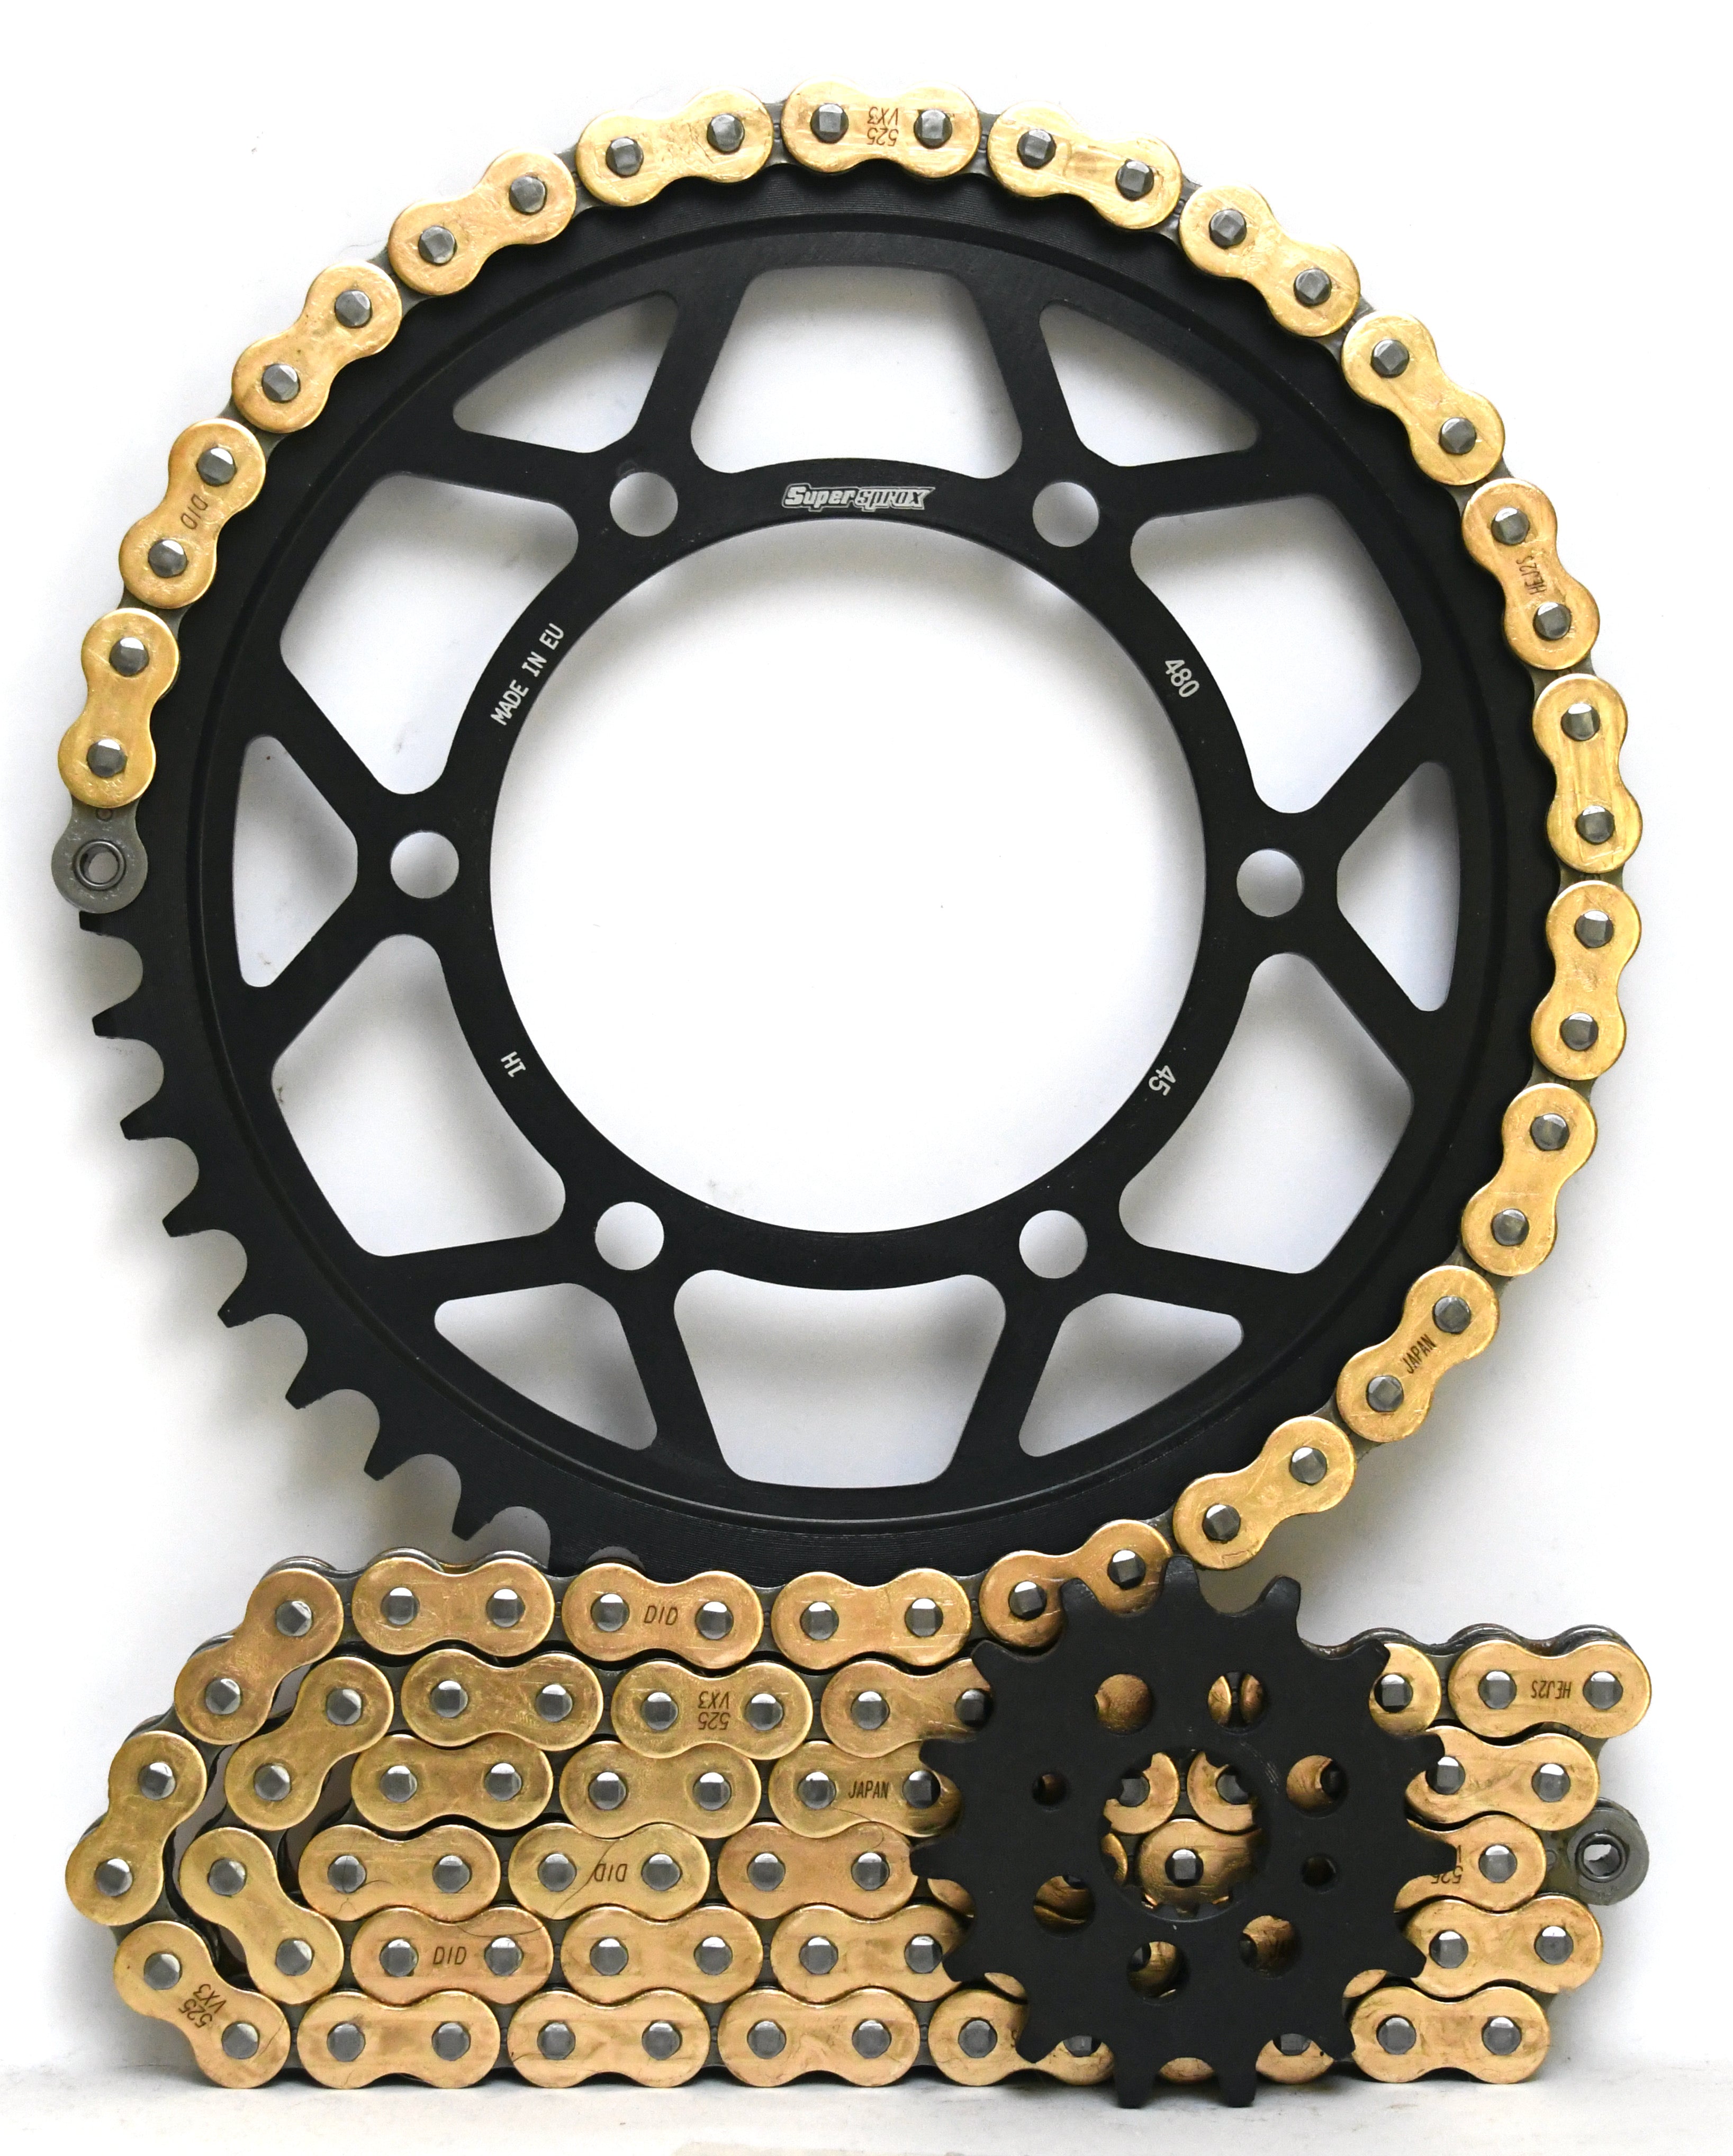 Performance　Steel　Supersprox　Kit　WSC　2004-2005　Yamaha　for　YZF　R1　St　Chain　Sprocket